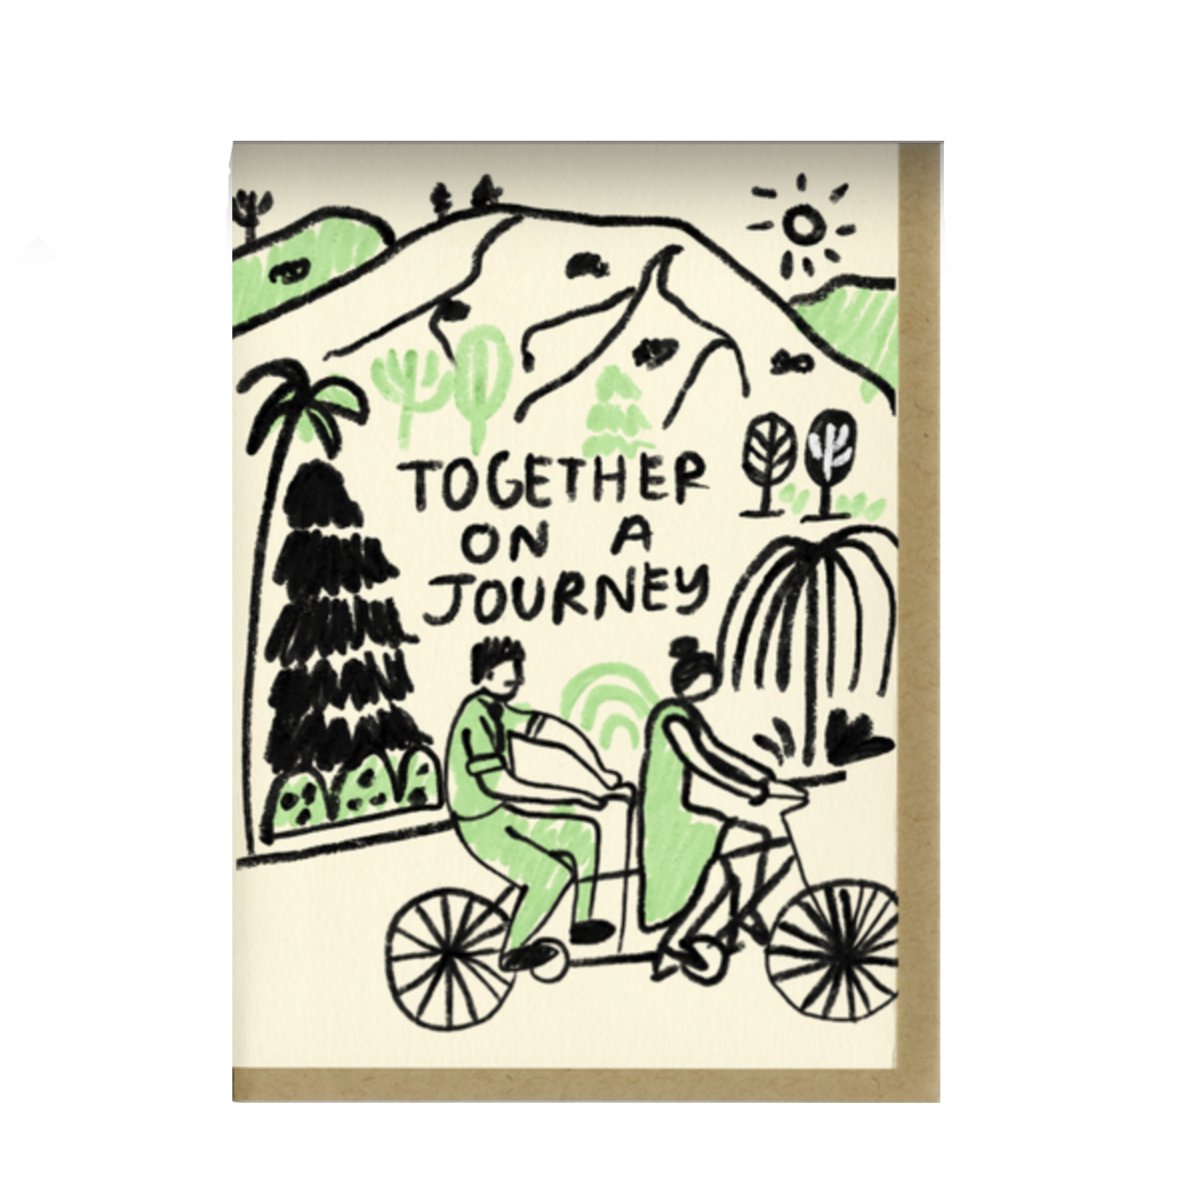 Off-white card with two figures on a tandem bicycle riding through the country. Front of card reads: "TOGETHER ON A JOURNEY." Printed in Oakland, California by People I've Loved in 